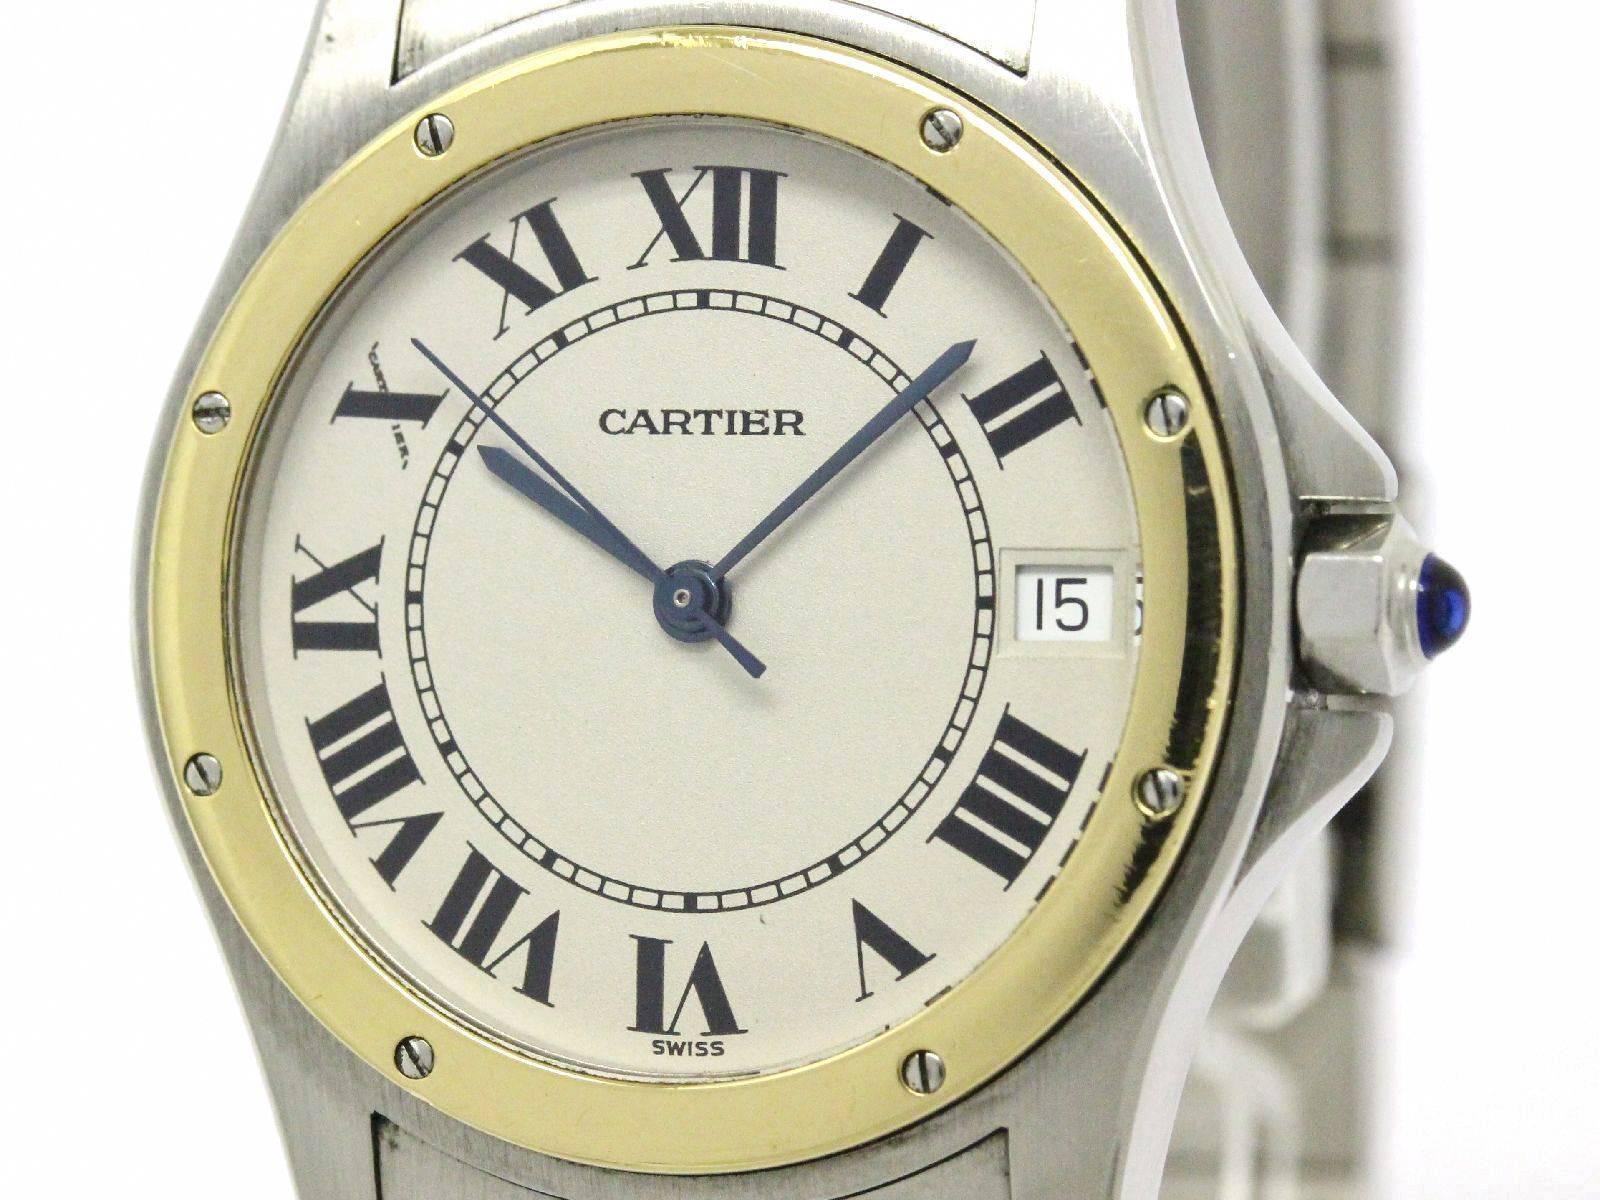 CURATOR'S NOTES

18kt yellow gold
Stainless steel
Automatic
Silver dial
Date function
Case diameter 35mm 
Band 7.1